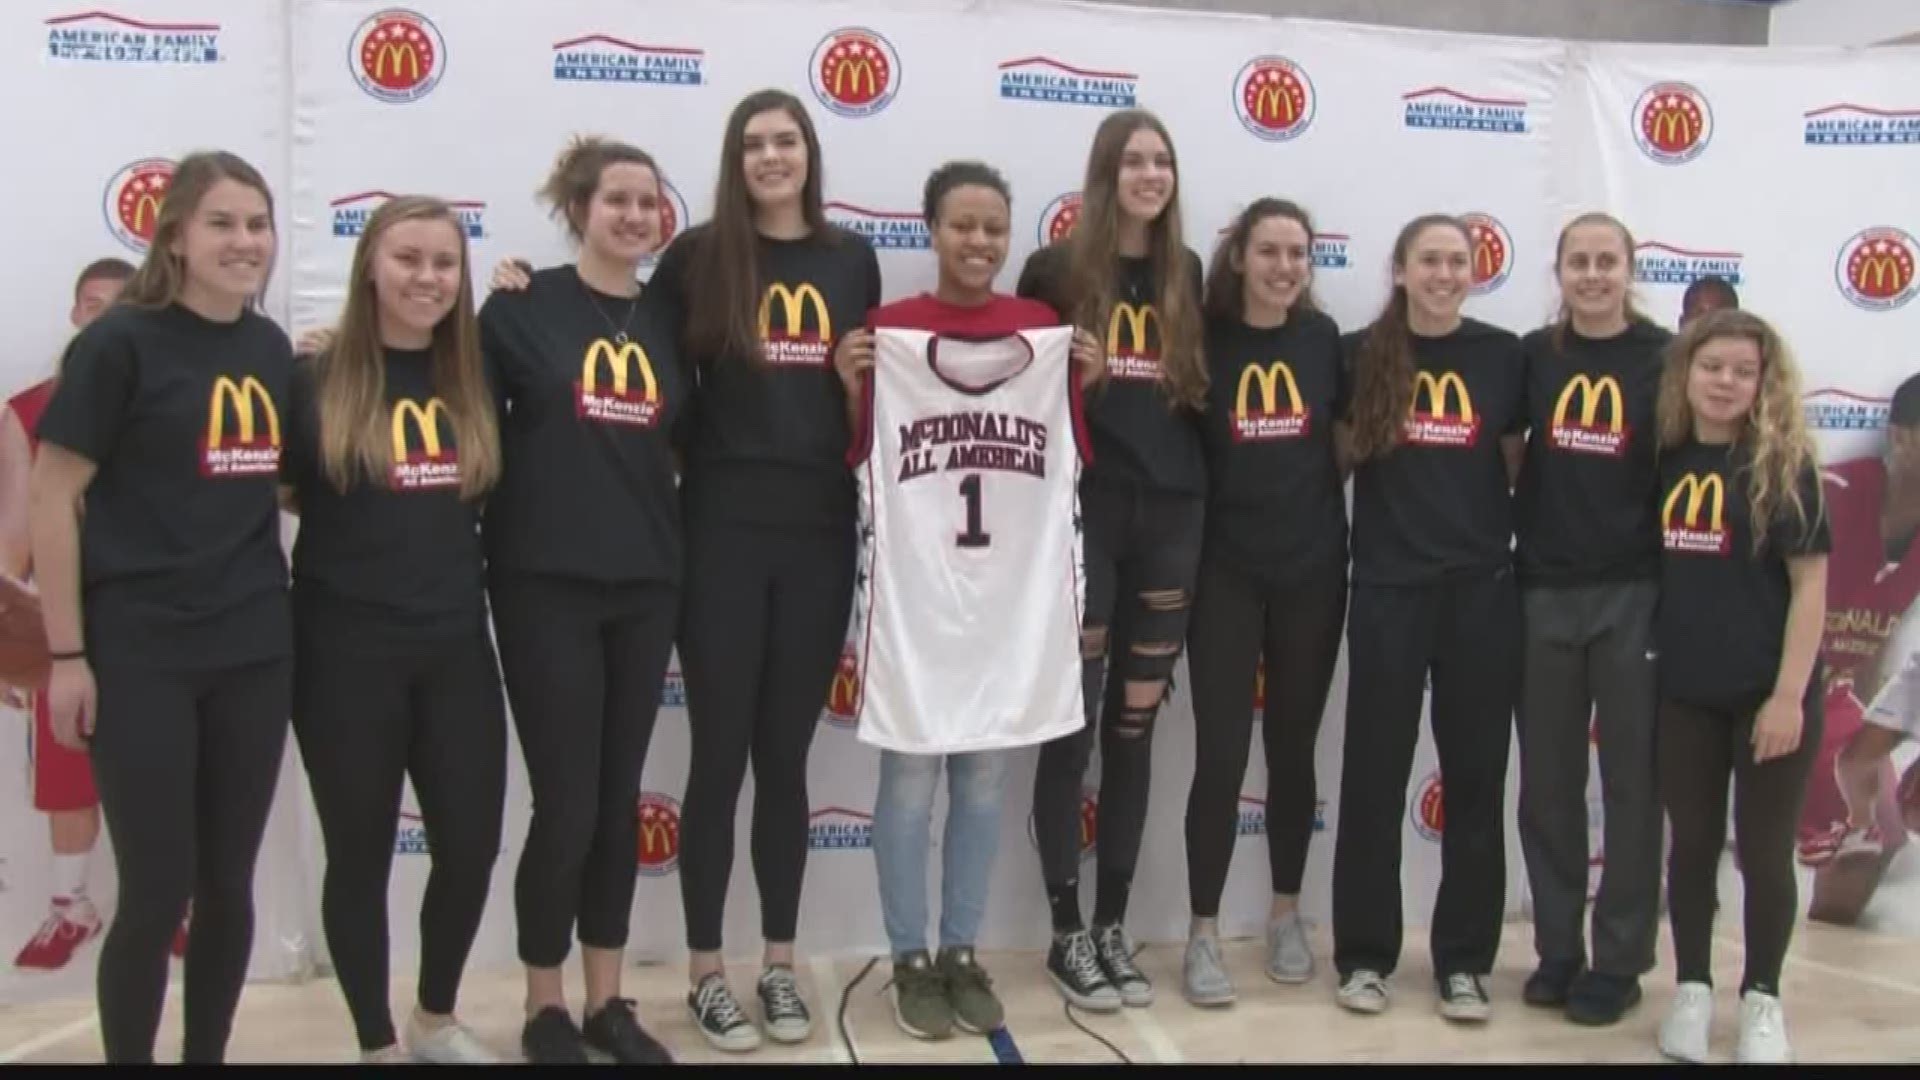 For the first time in history, three high school athletes from the Sacramento area have been selected for the McDonald's All-American Games in the same year. (Jan. 24, 2018)